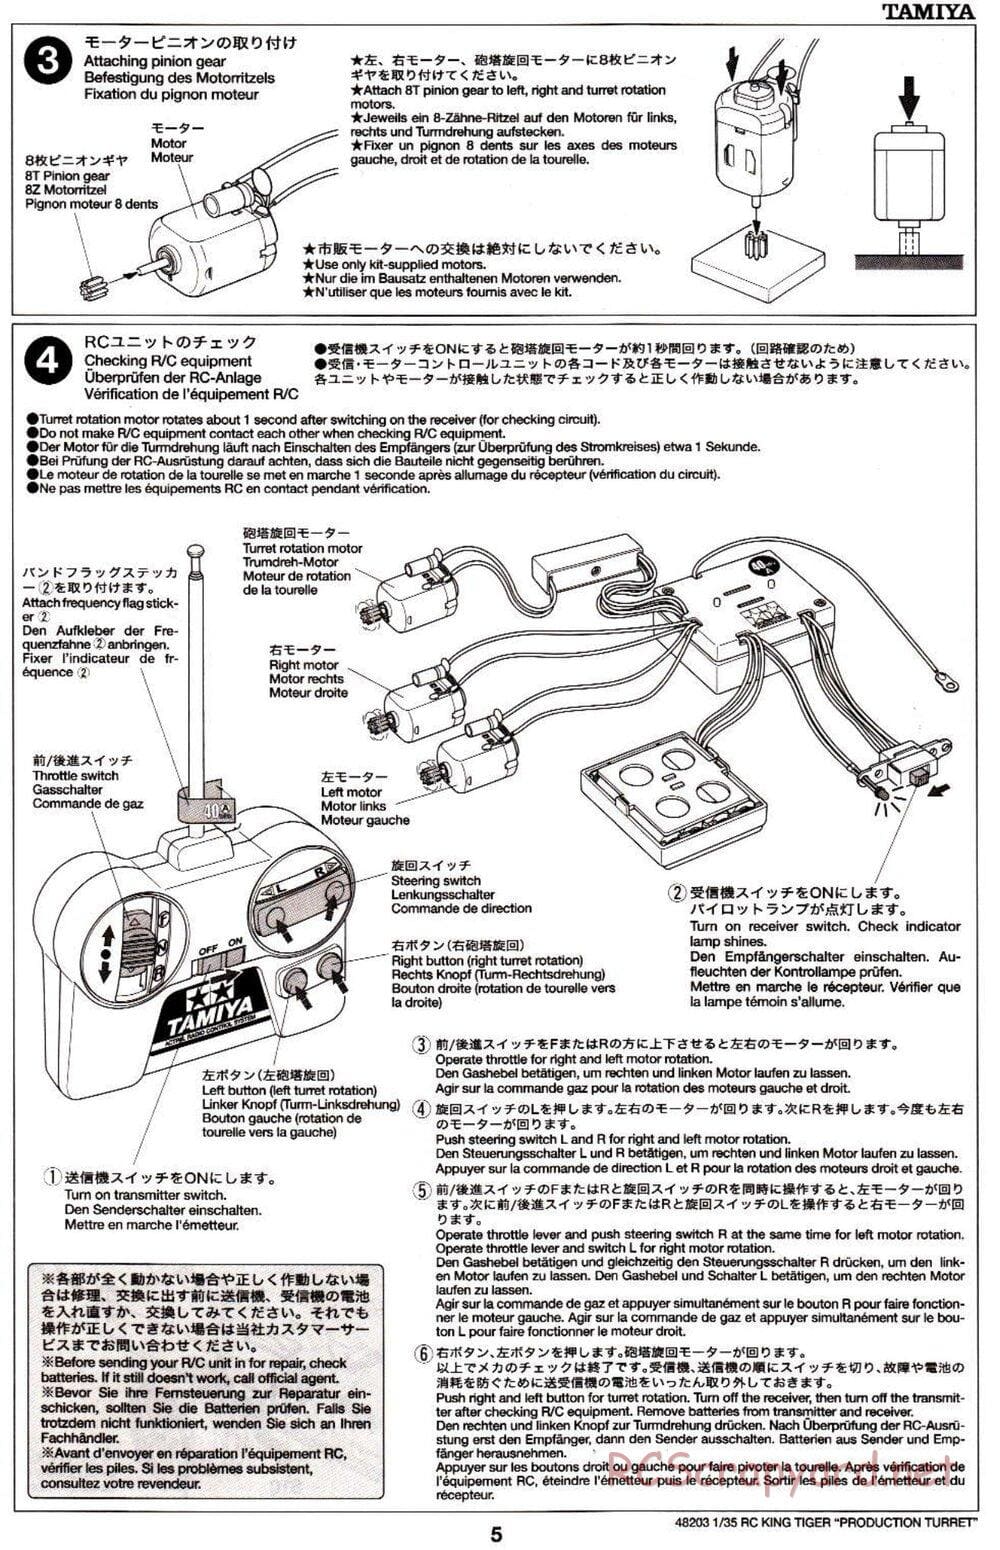 Tamiya - German King Tiger (Production Turret) - 1/35 Scale Chassis - Manual - Page 5